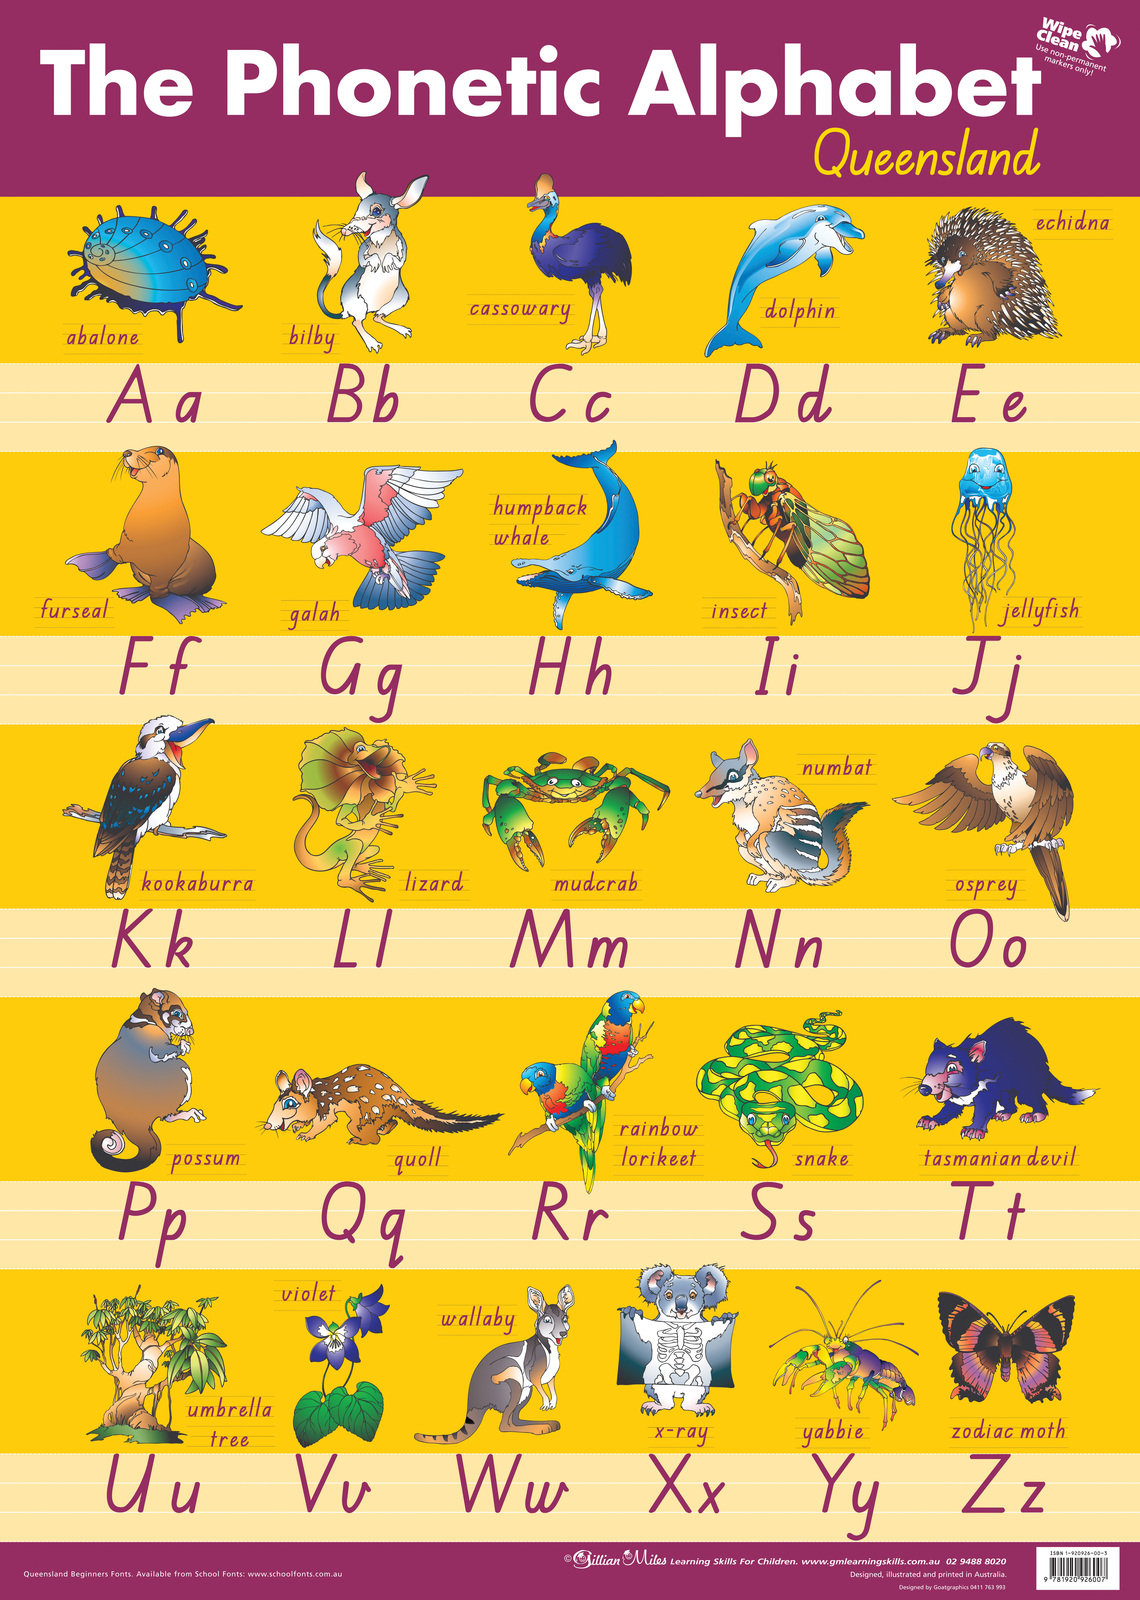 gillian-miles-phonetic-alphabet-chart-government-approved-font-for-the